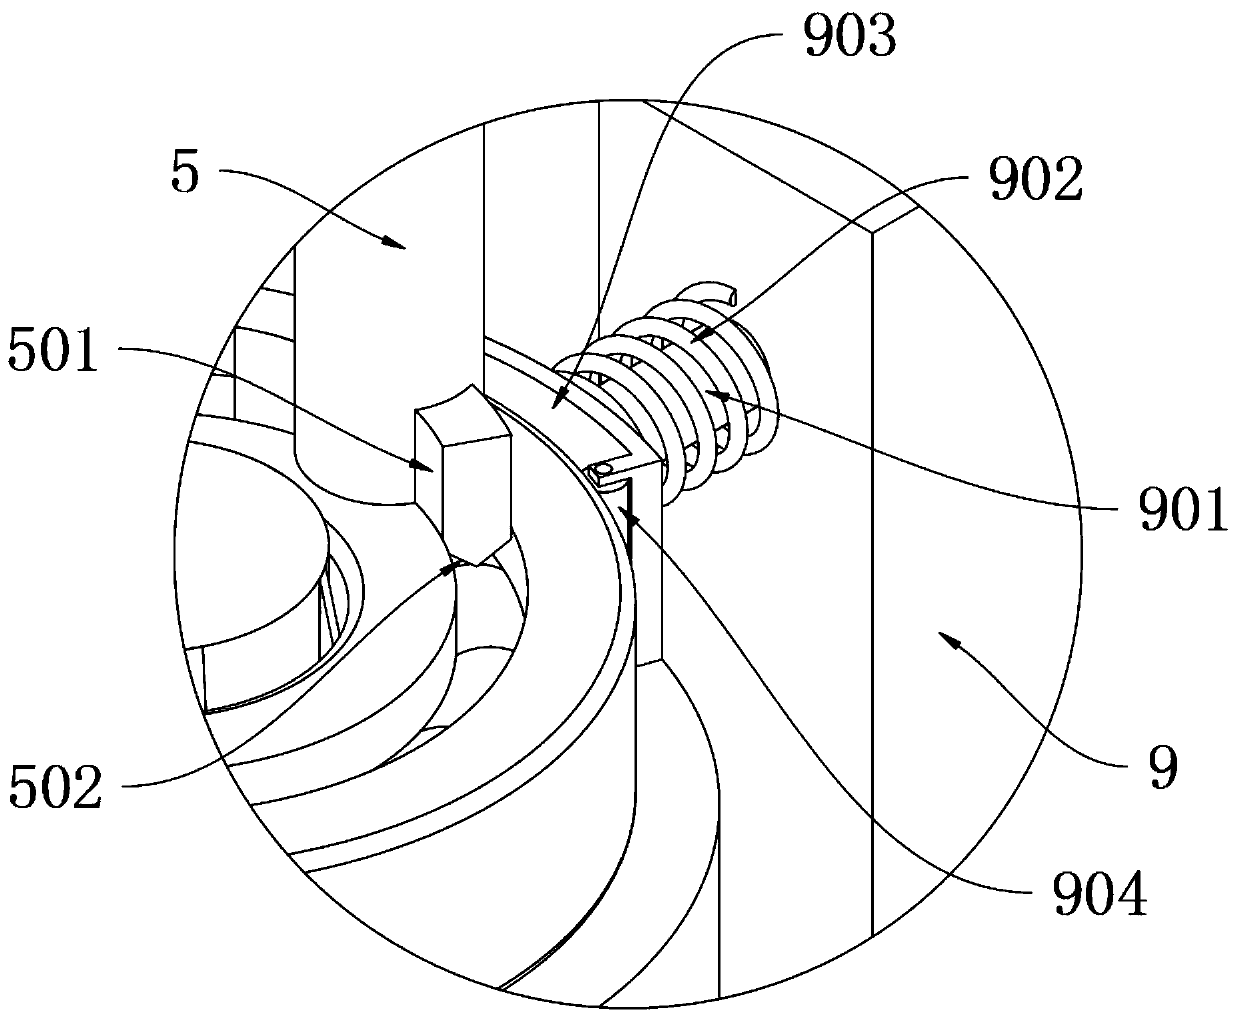 Bearing assembly device capable of automatically assembling rolling ball